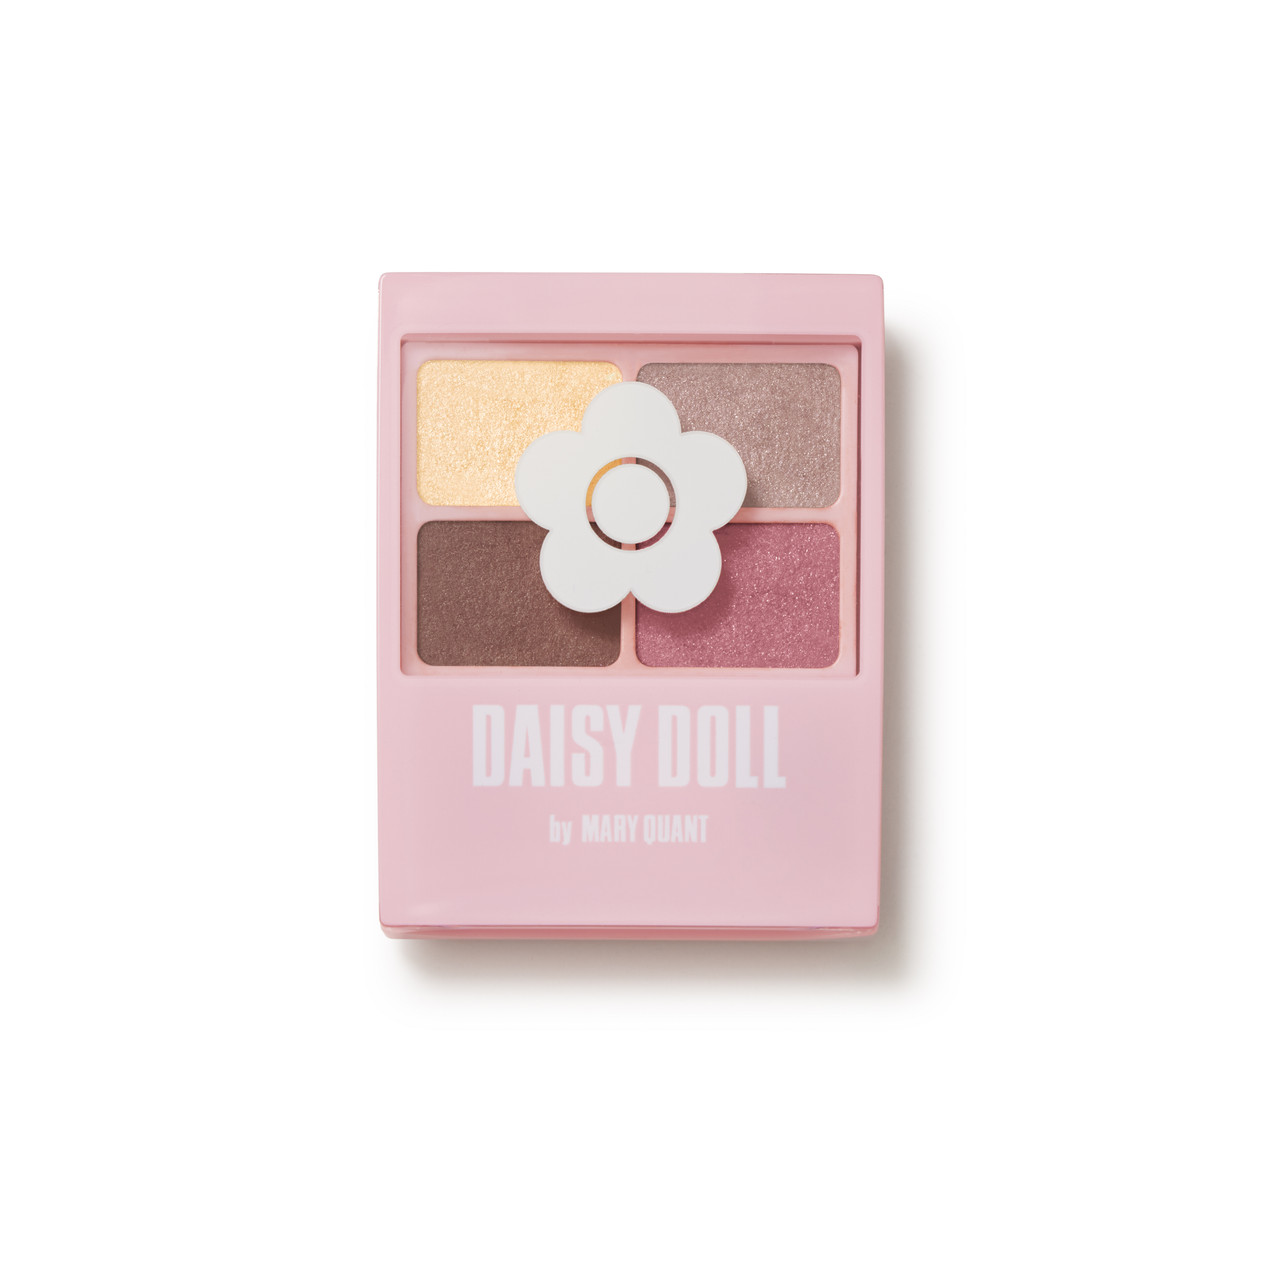 An eye colour palette with Daisy Doll by Mary Quant and the Mary Quant Daisy printed on the front. This shade is GR-01 Pink Grey. The four eyeshadow colours are (from top left, clockwise) light gold, grey taupe, cool pink, dark pinkish-brown.